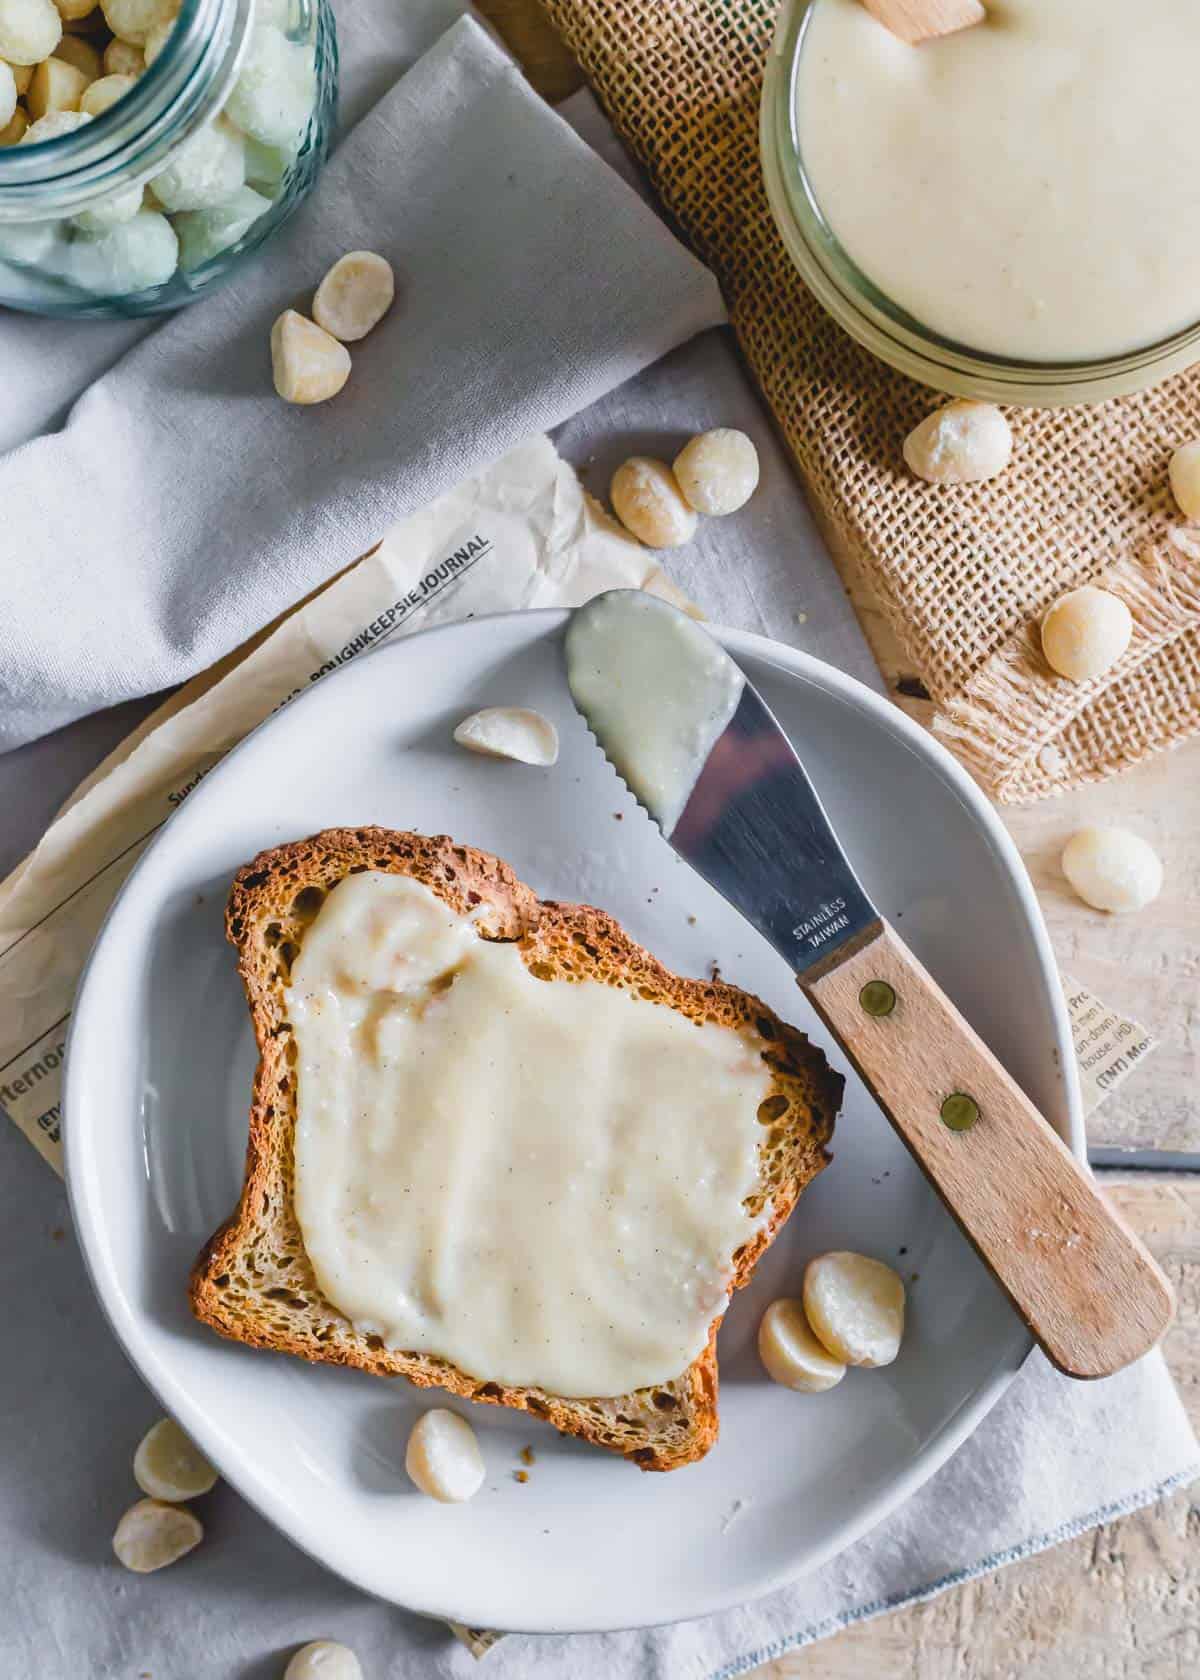 Macadamia butter spread on toast on a plate with a spatula.